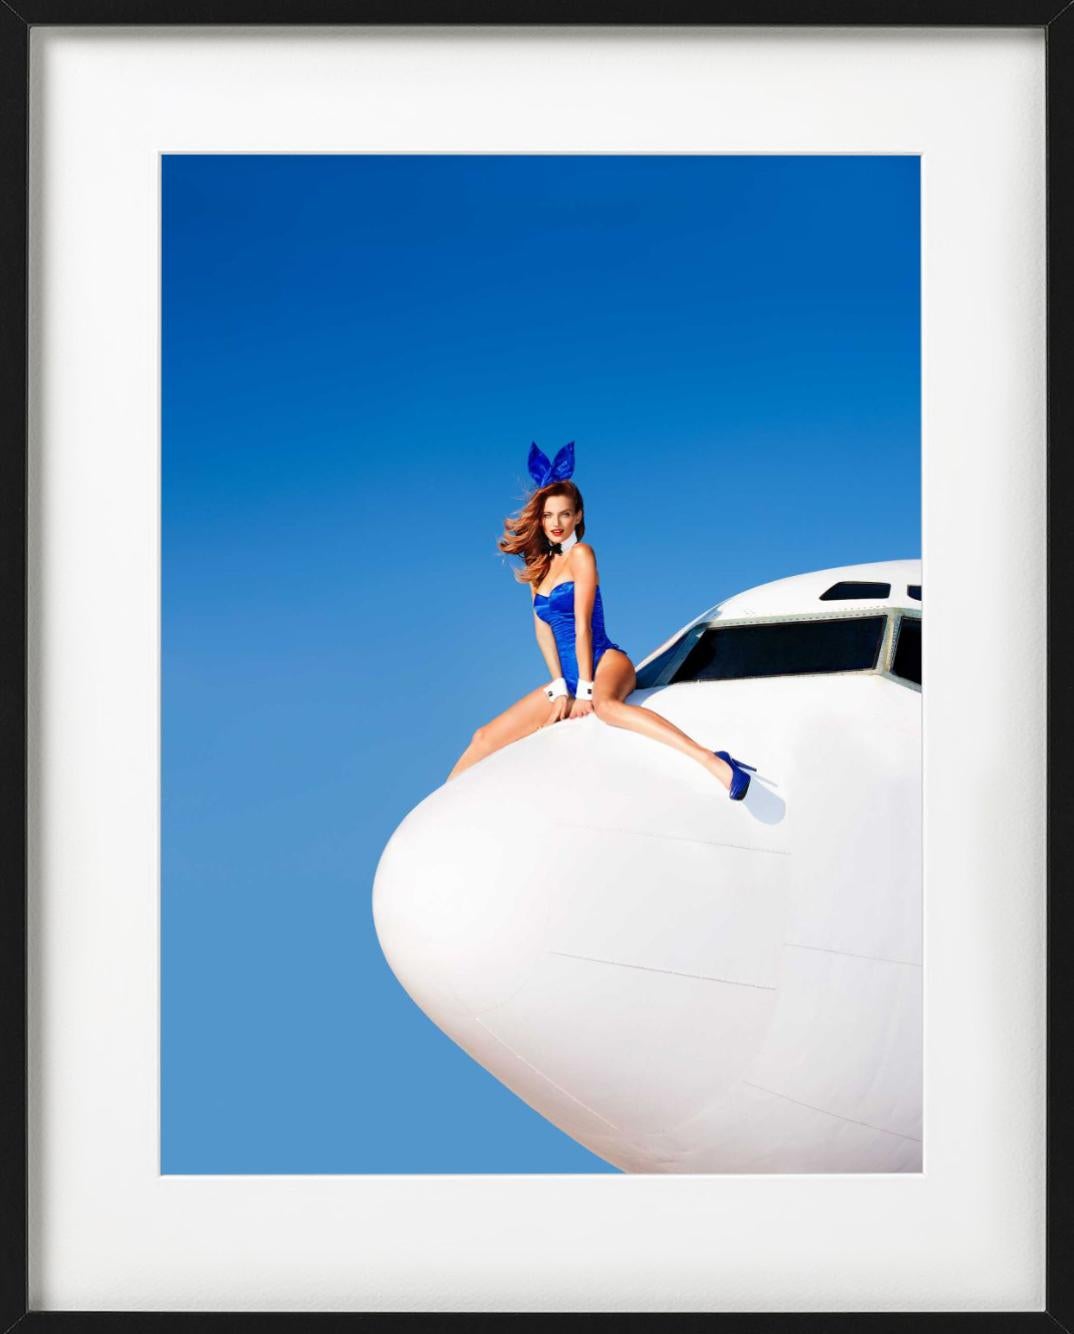 All prints are limited edition. Available in multiple sizes. High-end framing on request.


All prints are done and signed by the artist. The collector receives an additional certificate of authenticity from the gallery.

Airplanes are a recurring